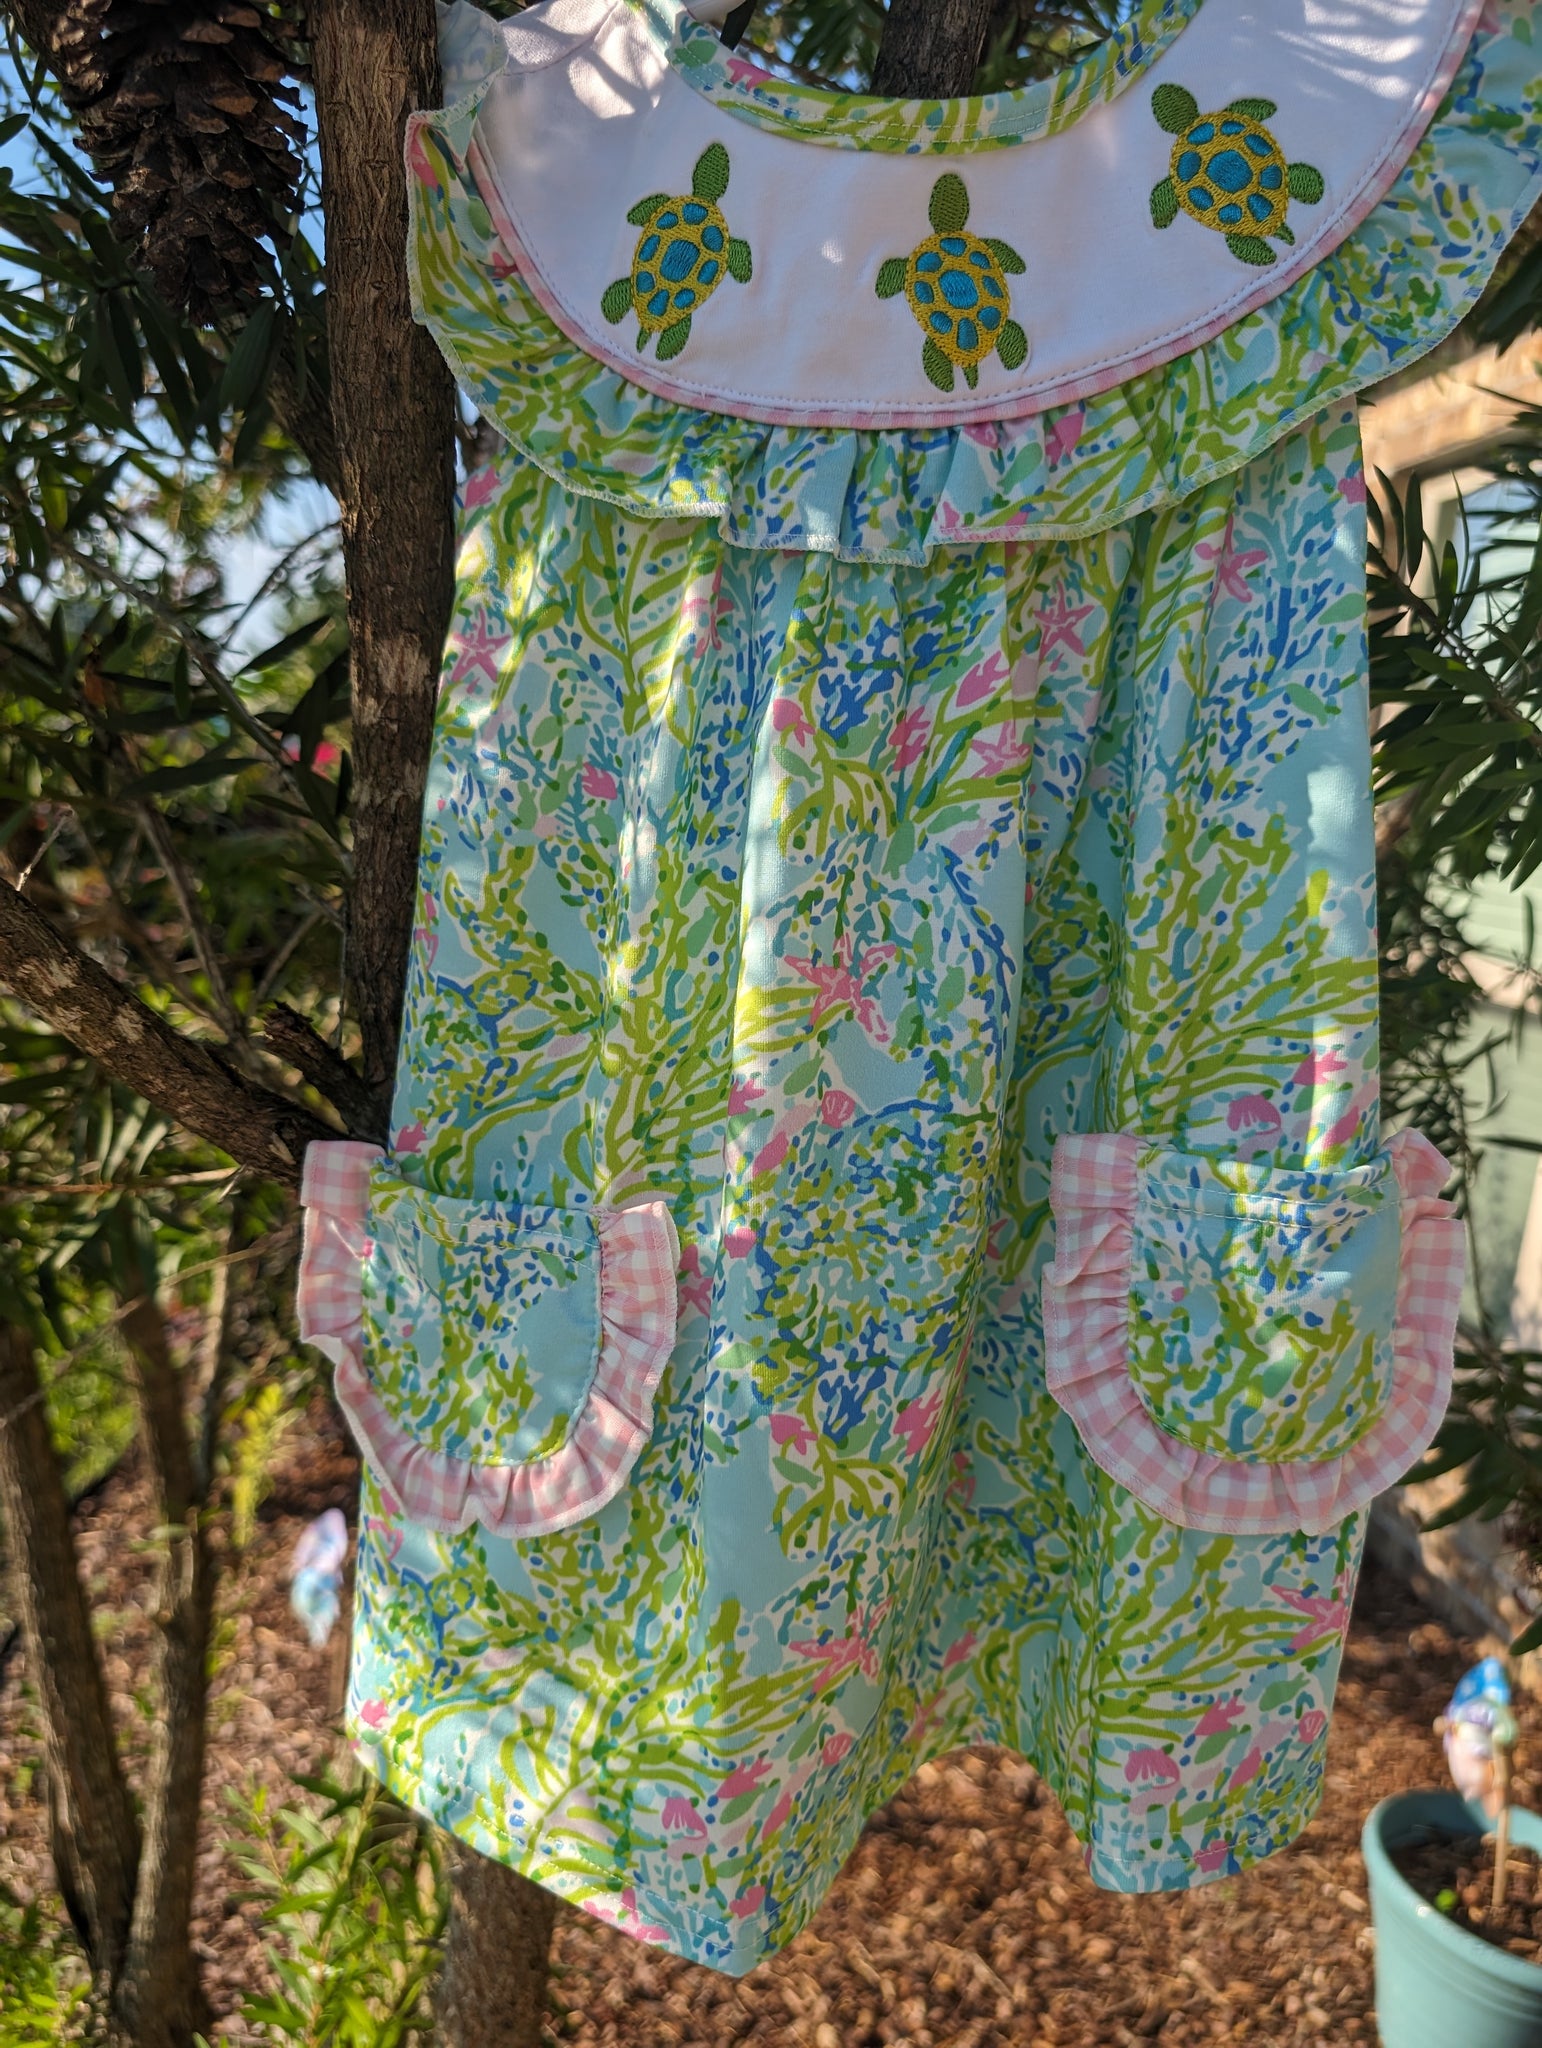 Lily Turtle Embroidered Dress Honeydew - Abby & Evie